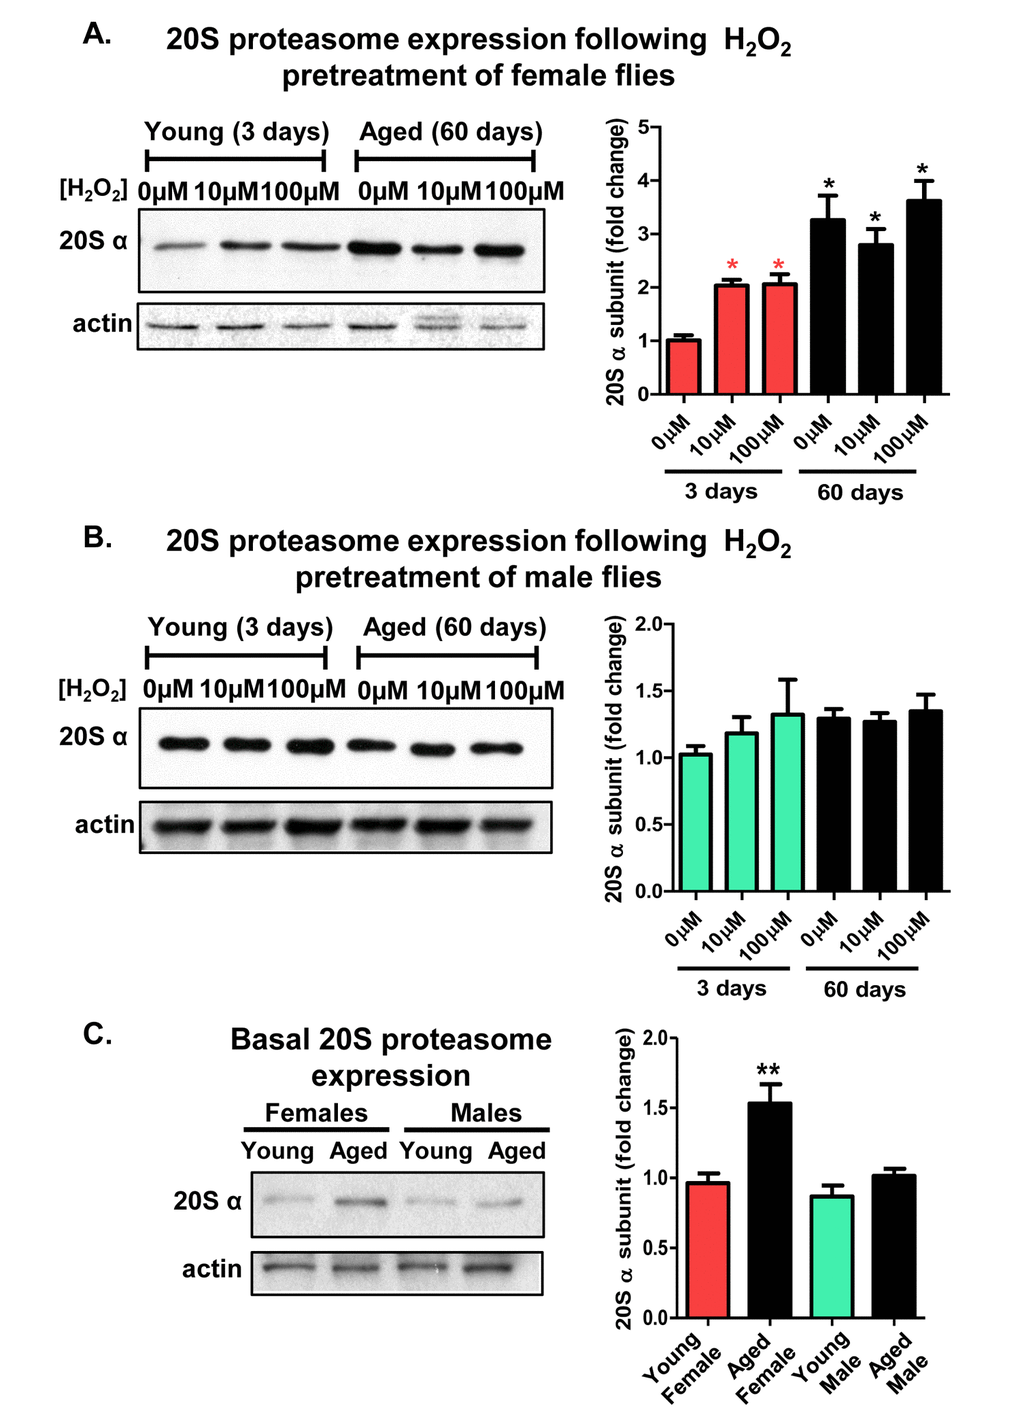 Adaptive de novo expression of the 20S proteasome diminishes with age in a sex-dependent manner. (A,B) Virgin females of the Actin-GS-255B strain were crossed to males of the w[1118] strain and progeny were assayed for 20Sα expression without H2O2 pretreatment, or after pretreatment with [10µM or 100µM] H2O2. (A) 3 day and 60 day aged females. (B) 3 day and 60 day aged males. All samples were compared to the 3 day old 0µM H2O2 controls (C) Basal expression of the 20S proteasome α subunits was measured between 3 day old females, 60 day old females, 3 day old males, and 60 day old males, with samples normalized to the 3 day old female. Western blots were performed in triplicate, normalized to Actin-HRP, and quantified using ImageJ. Error bars denote standard error of the mean (S.E.M) values. * P P *) and aged female (black *). All statistical significance was calculated relative to the young controls.